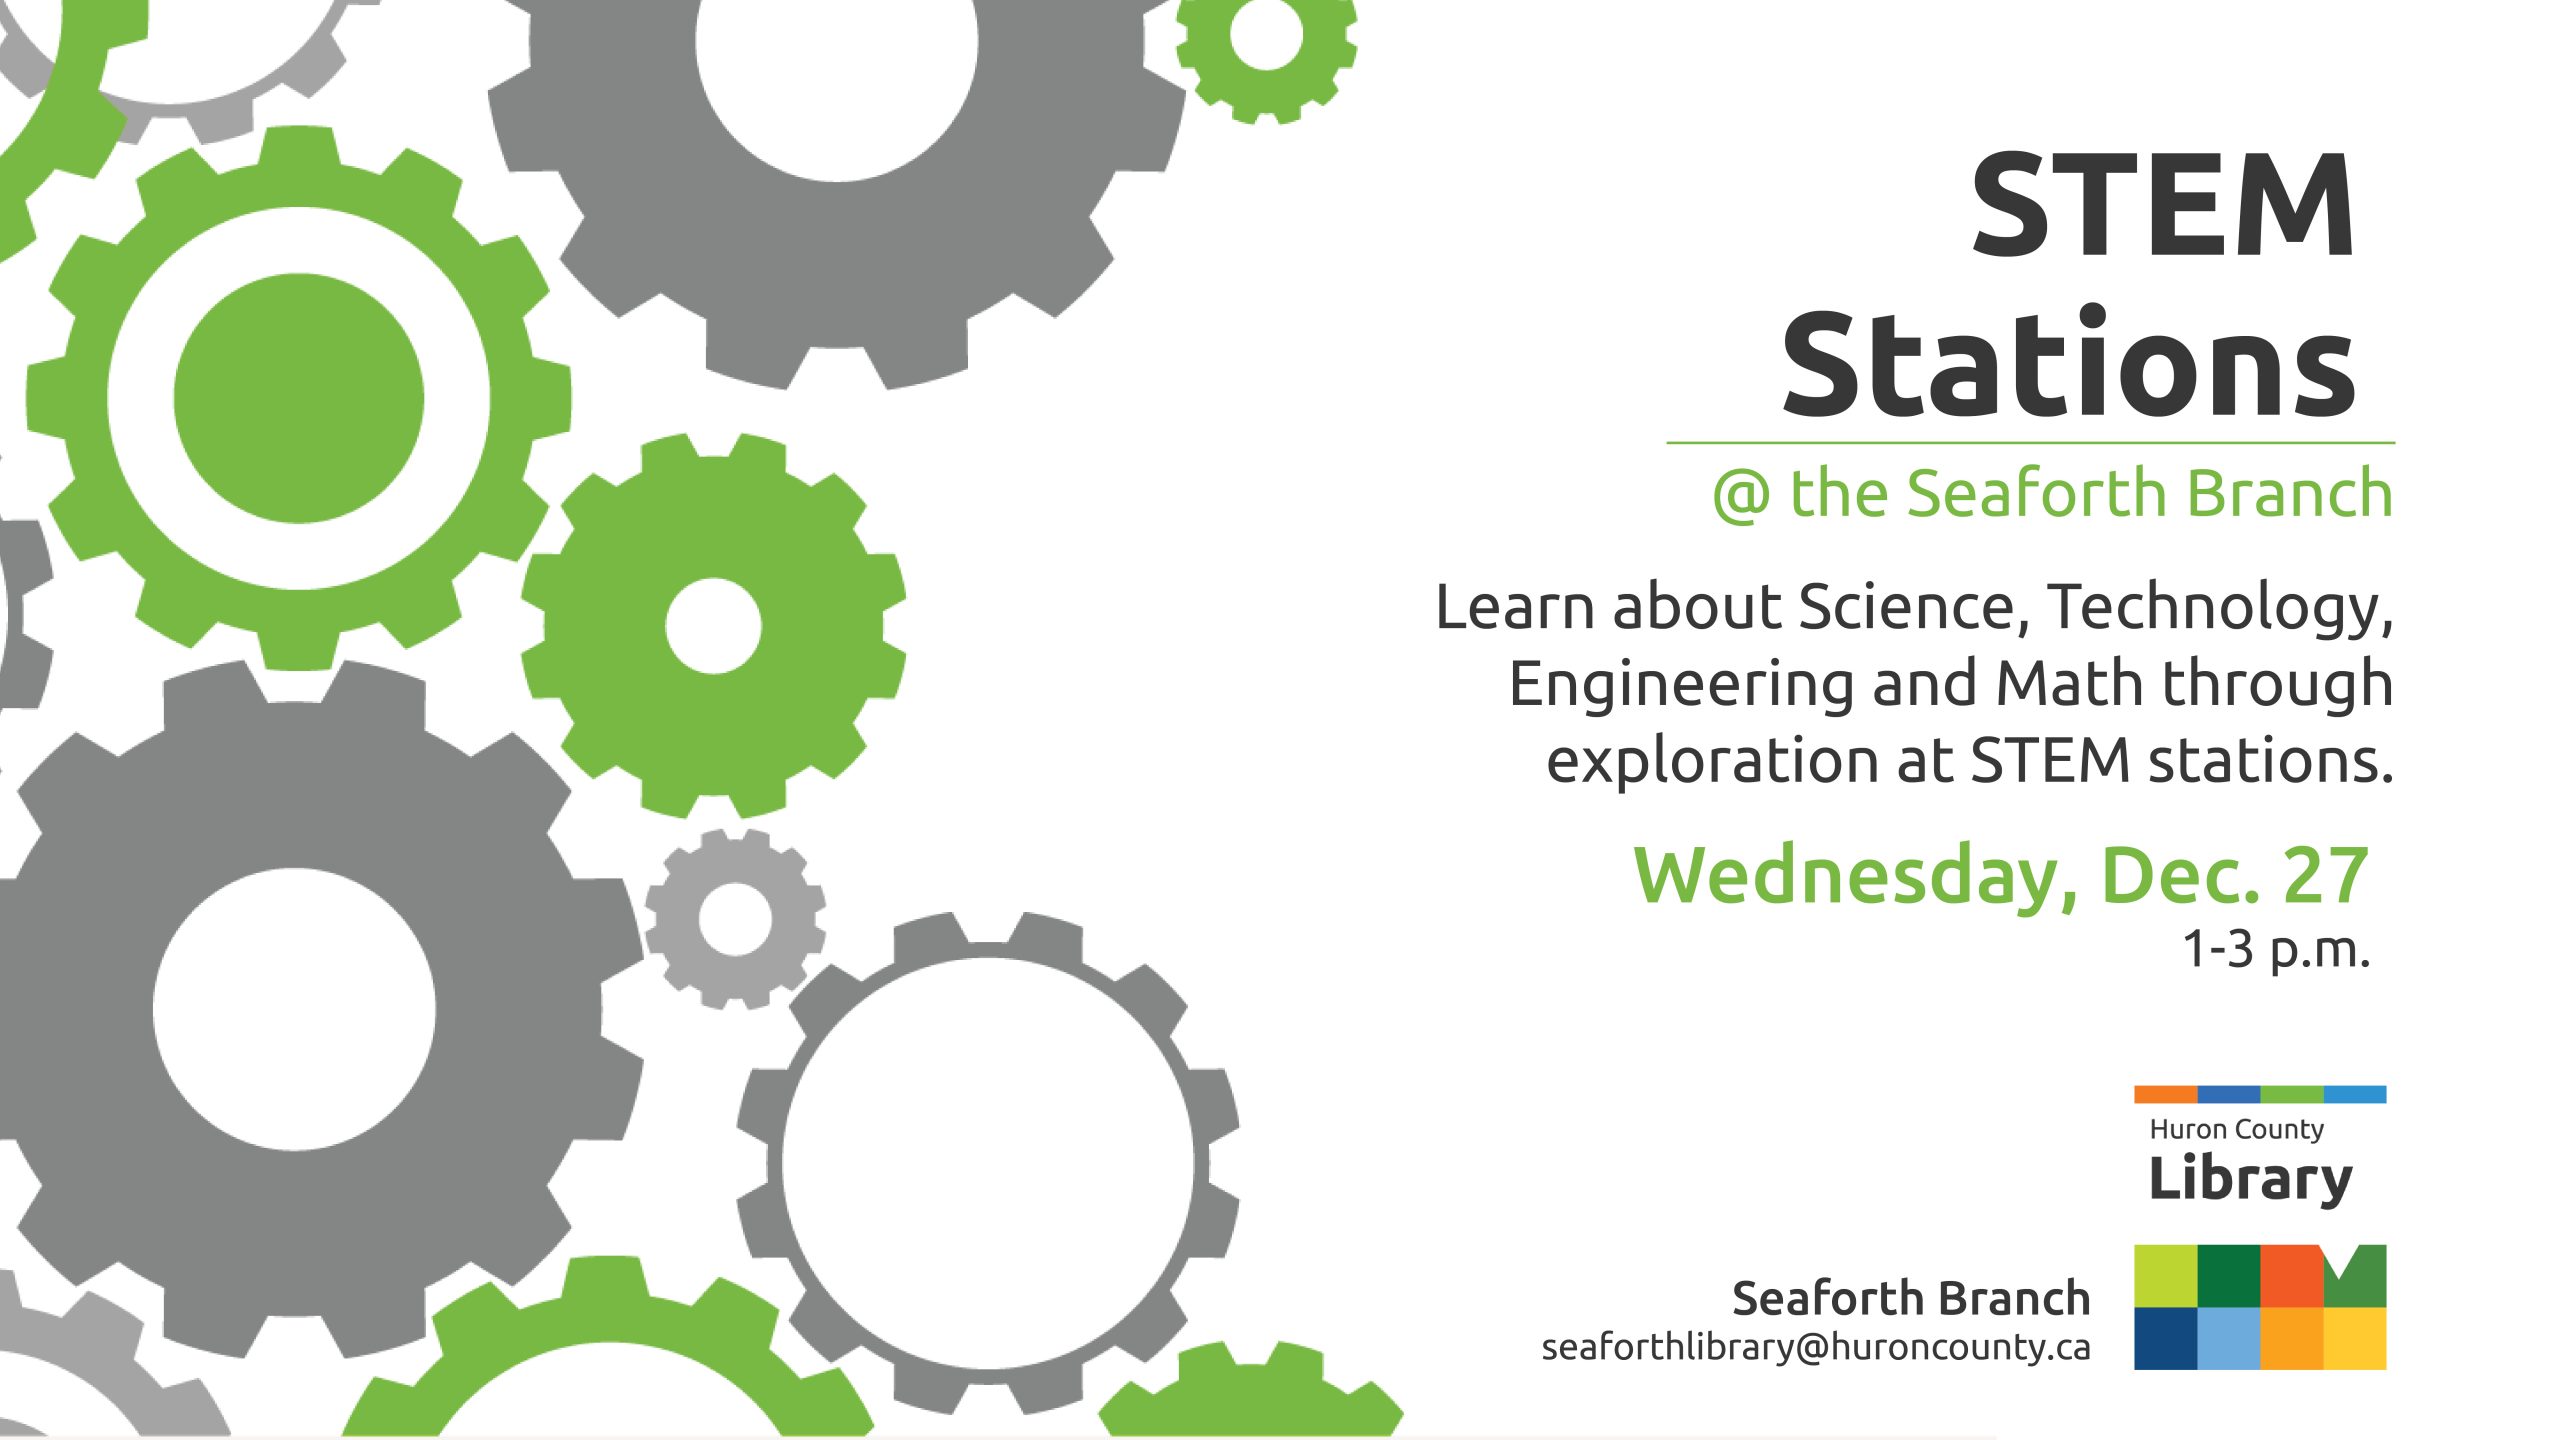 Illustration of gears with text promoting STEM stations at Seaforth Branch